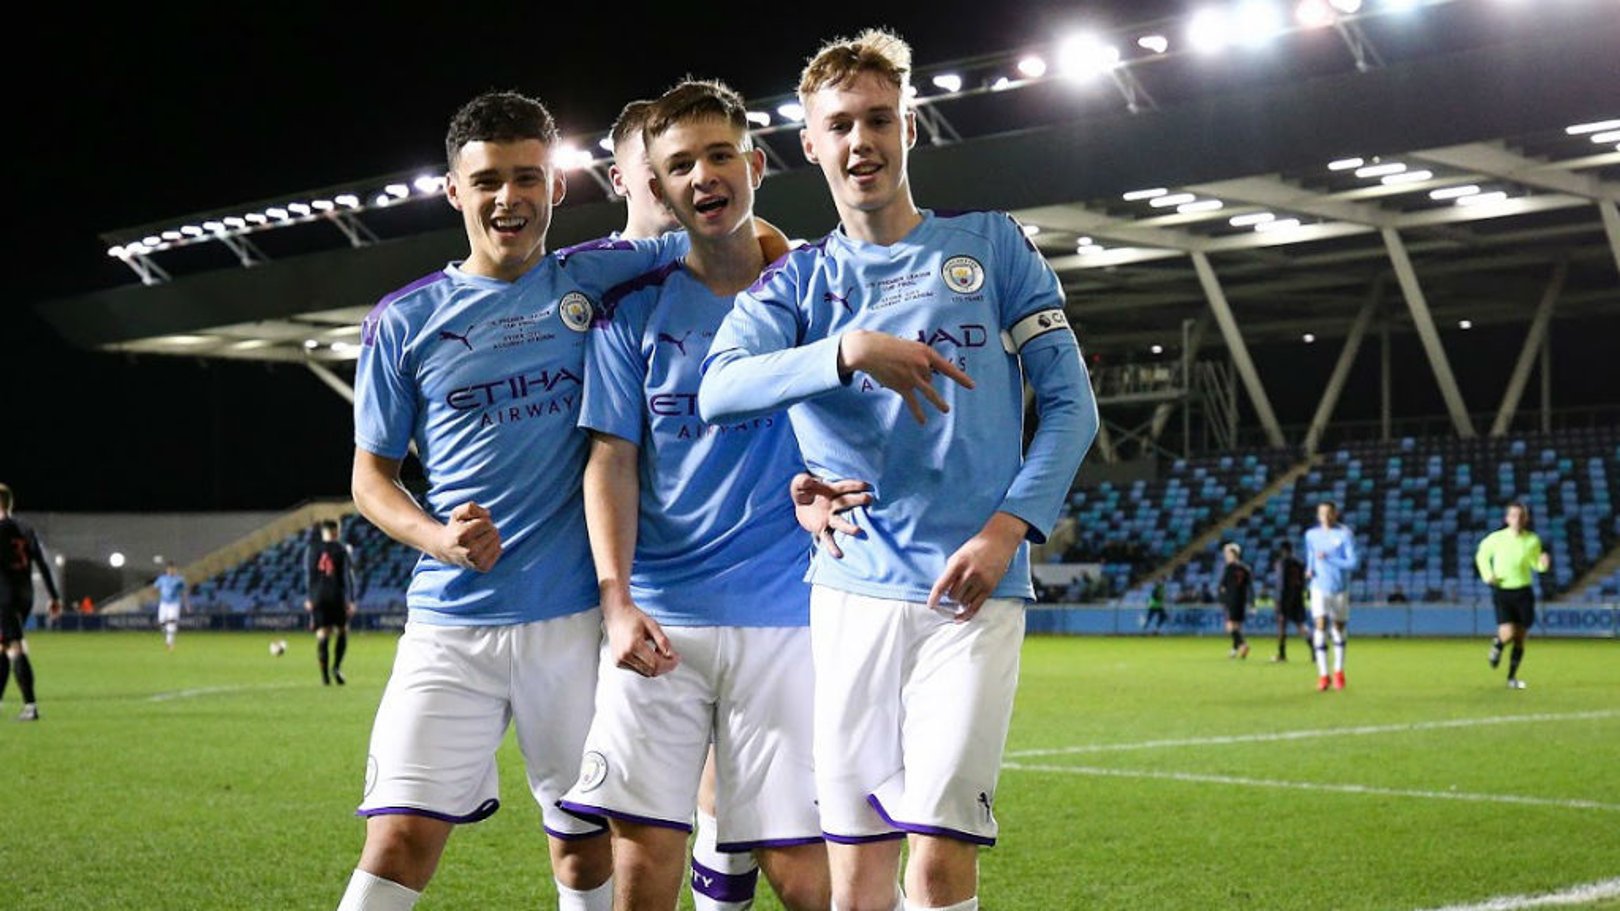 City Under 18s hungry for more success, says Palmer